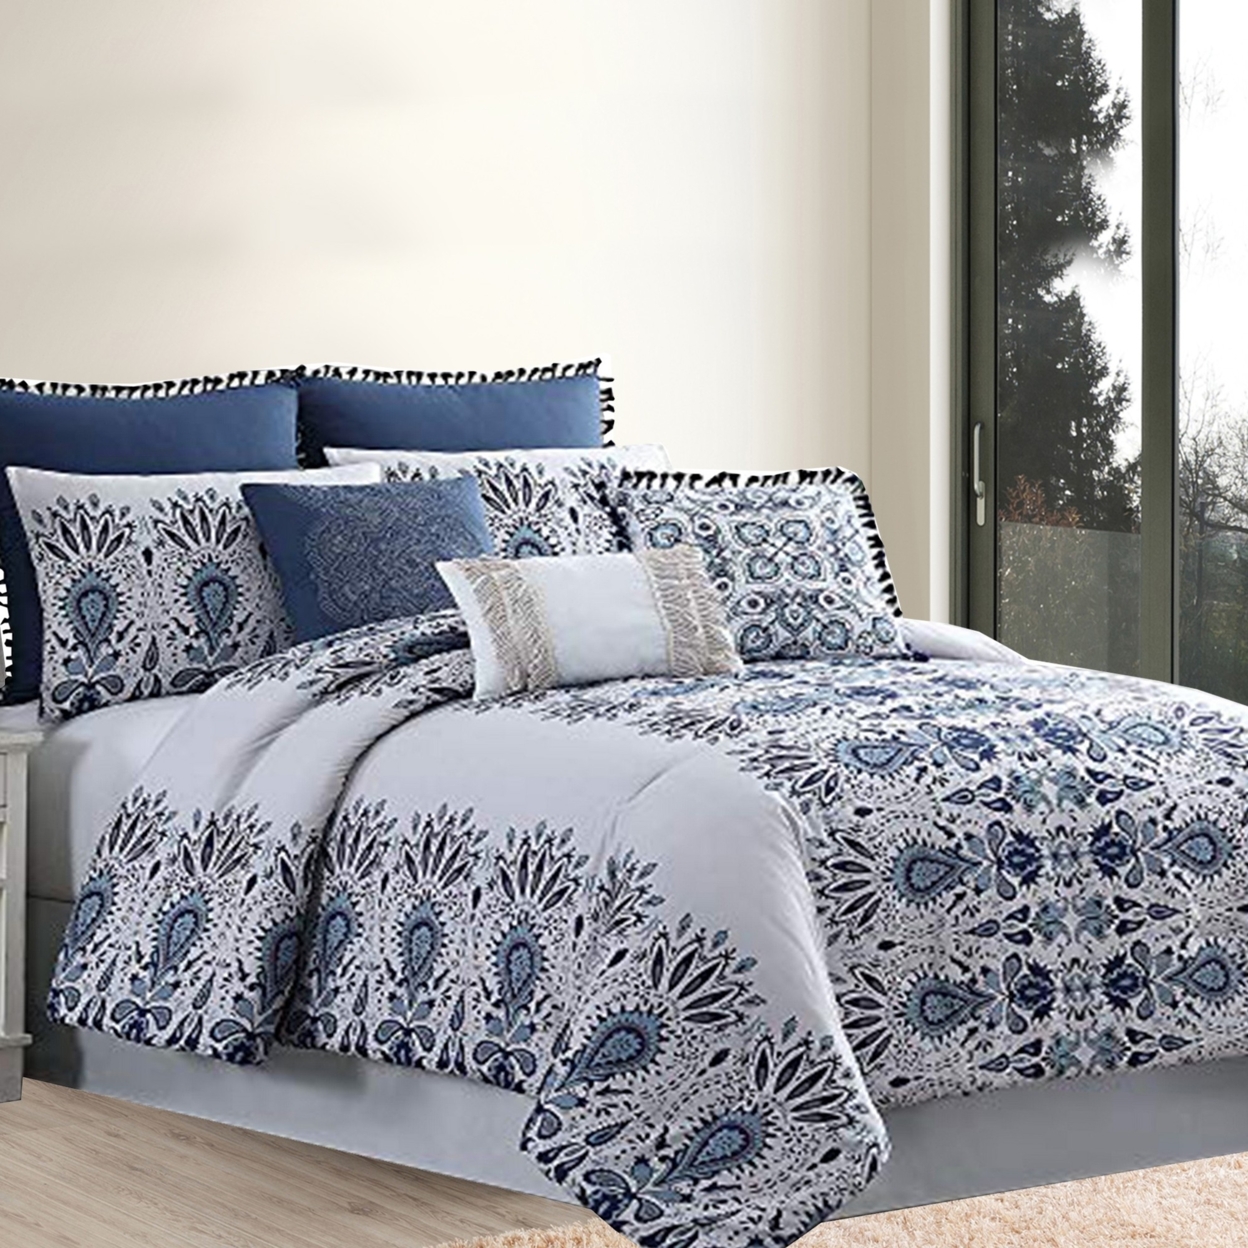 Constana 8 Piece King Comforter Set With Floral Print The Urban Port, Blue And White- Saltoro Sherpi